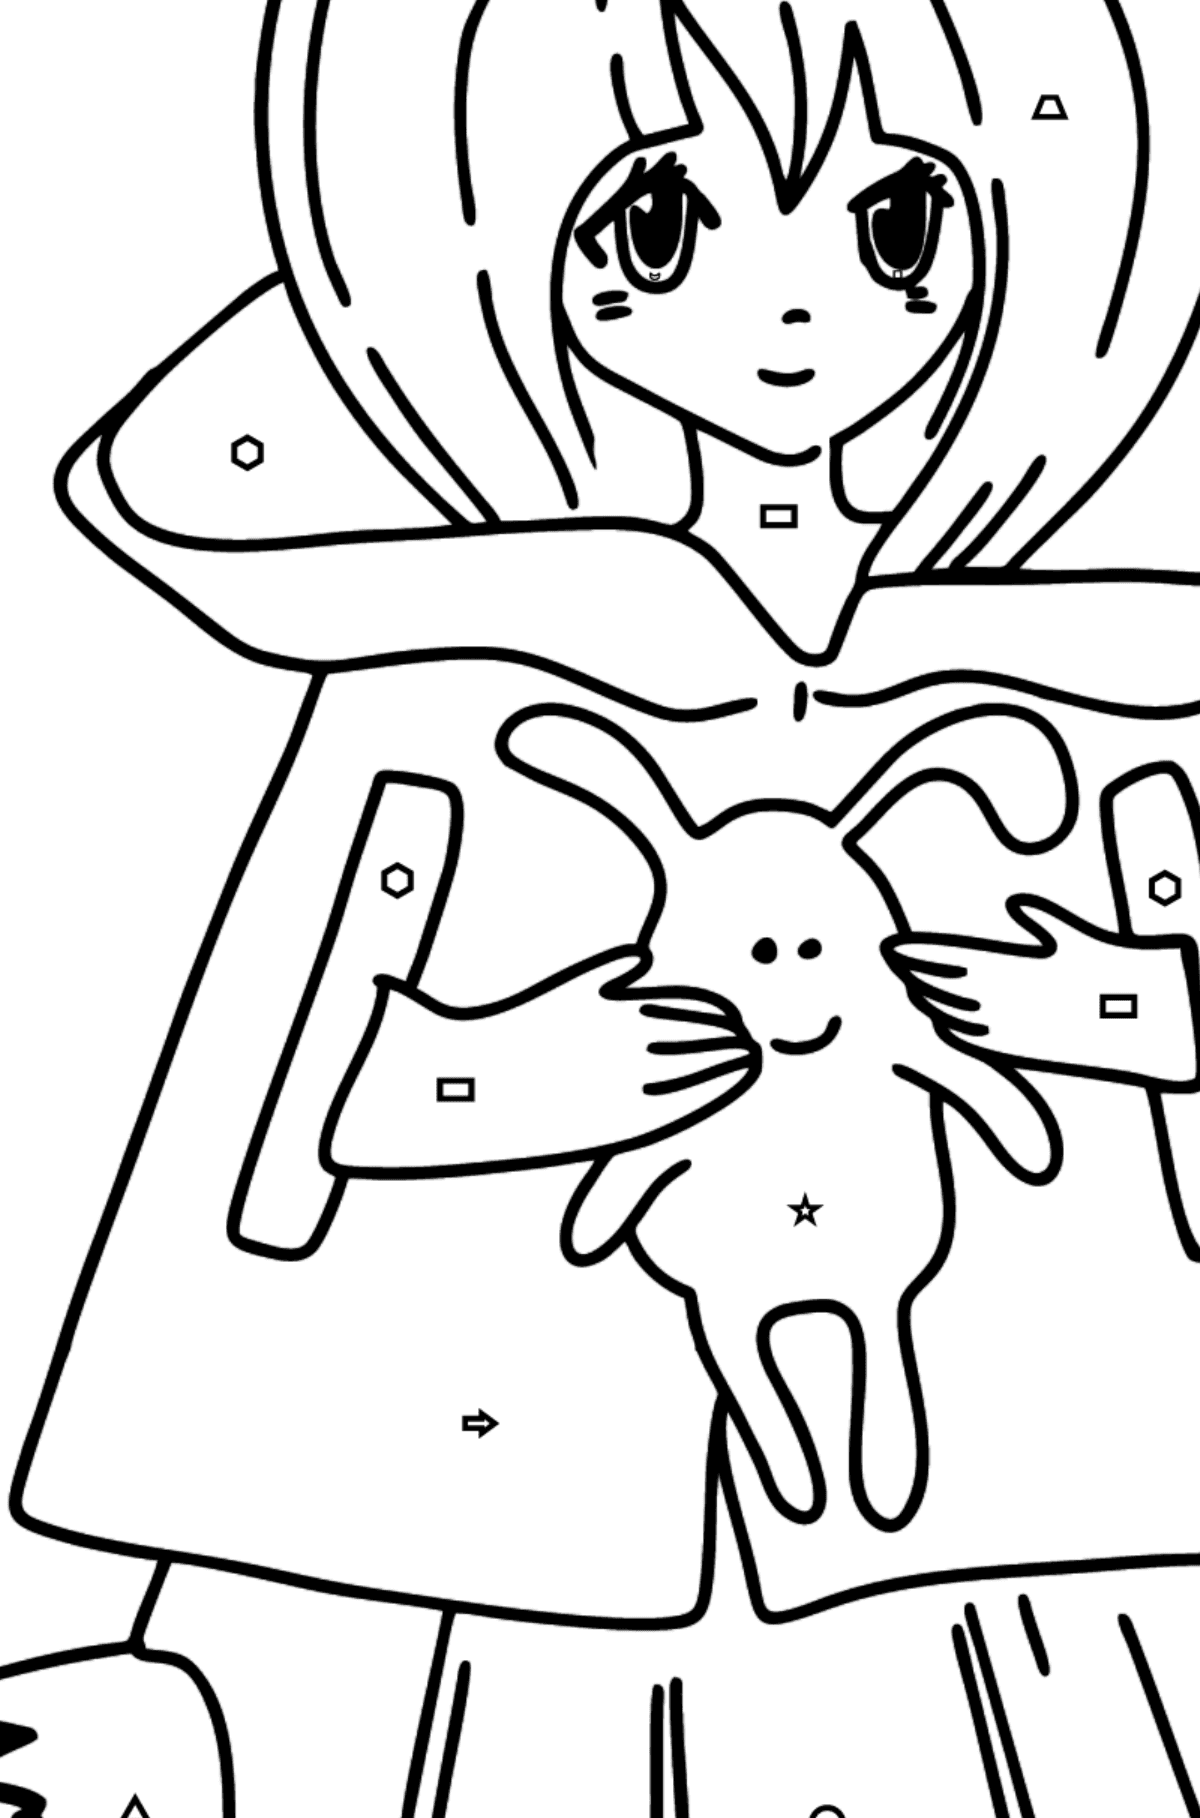 Anime Girl with Tail coloring page - Coloring by Geometric Shapes for Kids